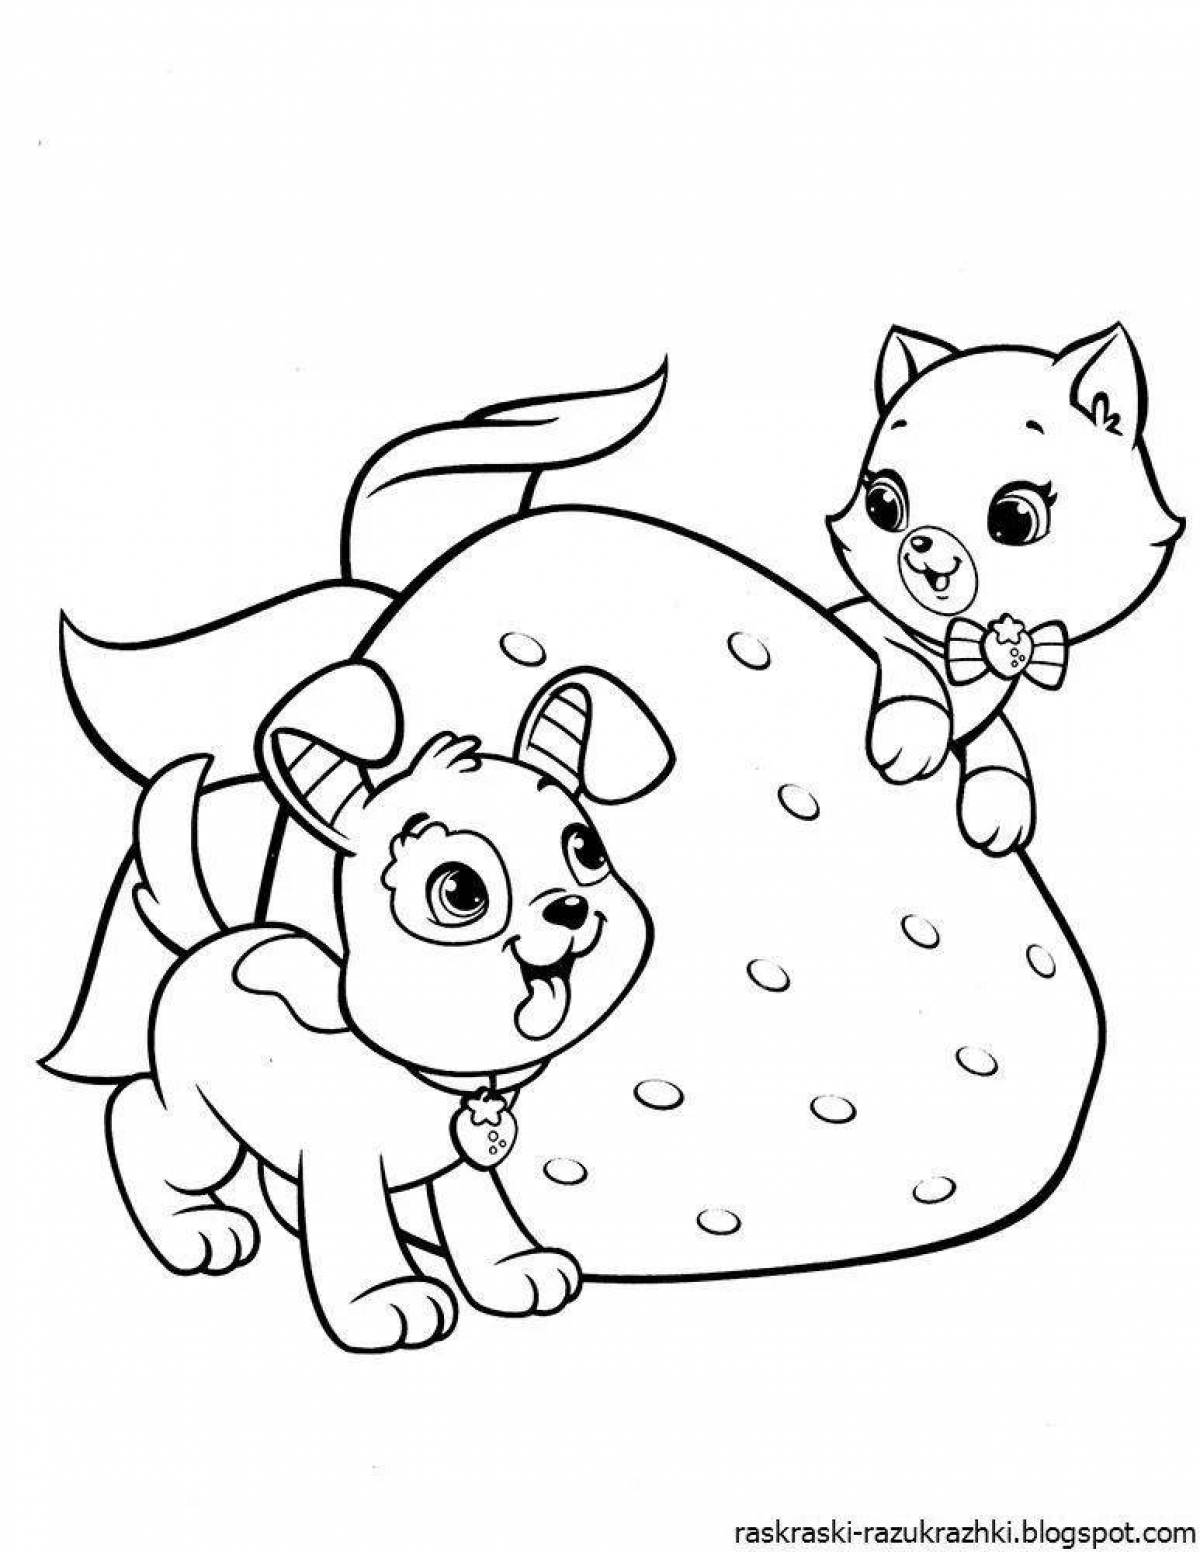 Colouring serene dog and cat